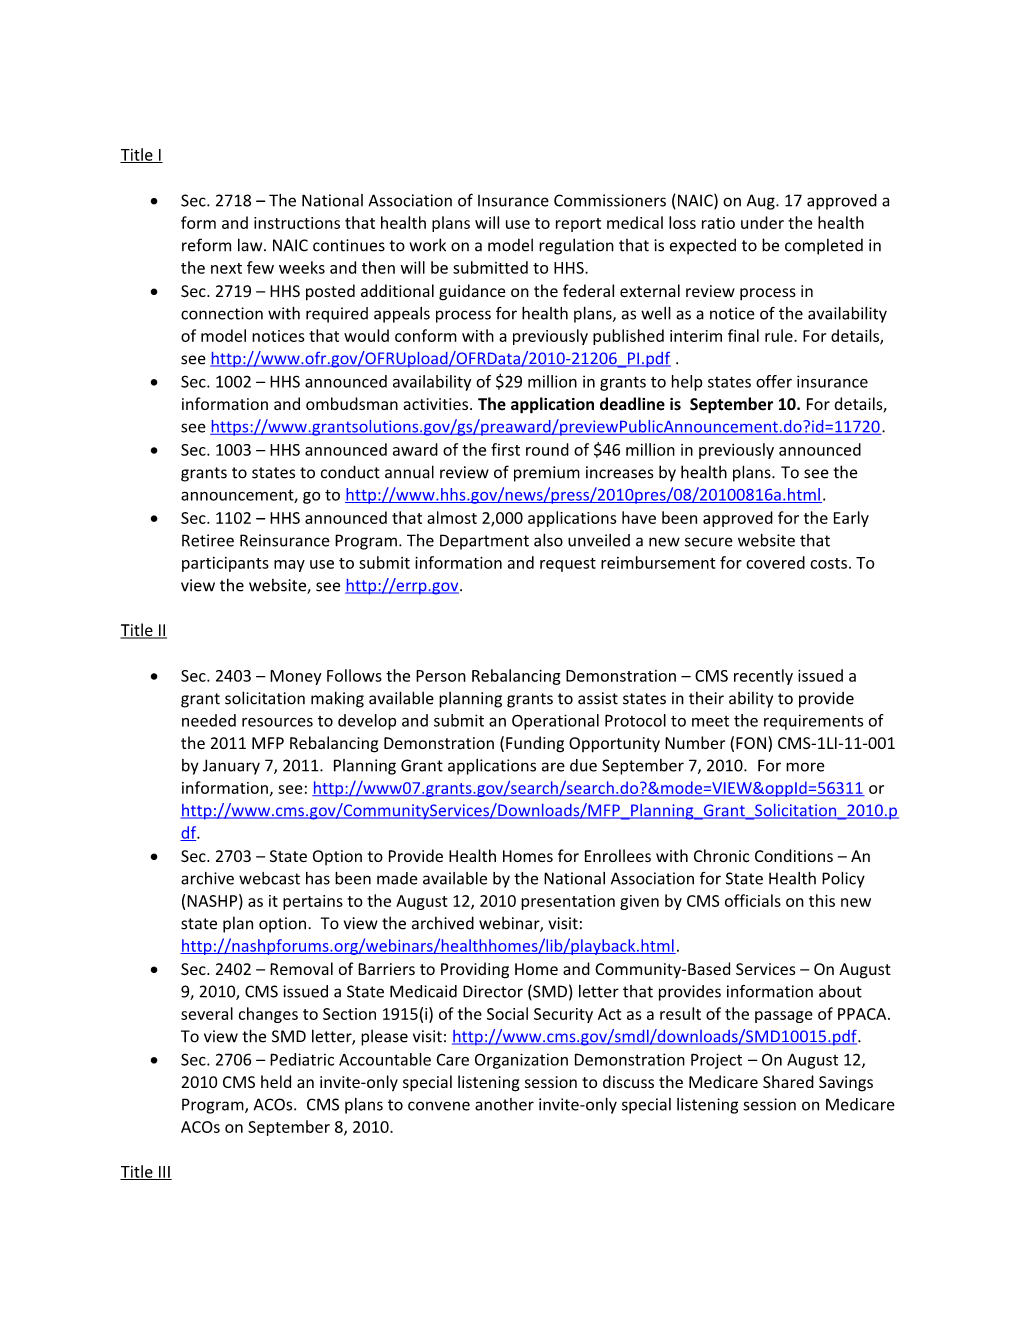 Sec. 2719 HHS Posted Additional Guidance on the Federal External Review Process in Connection